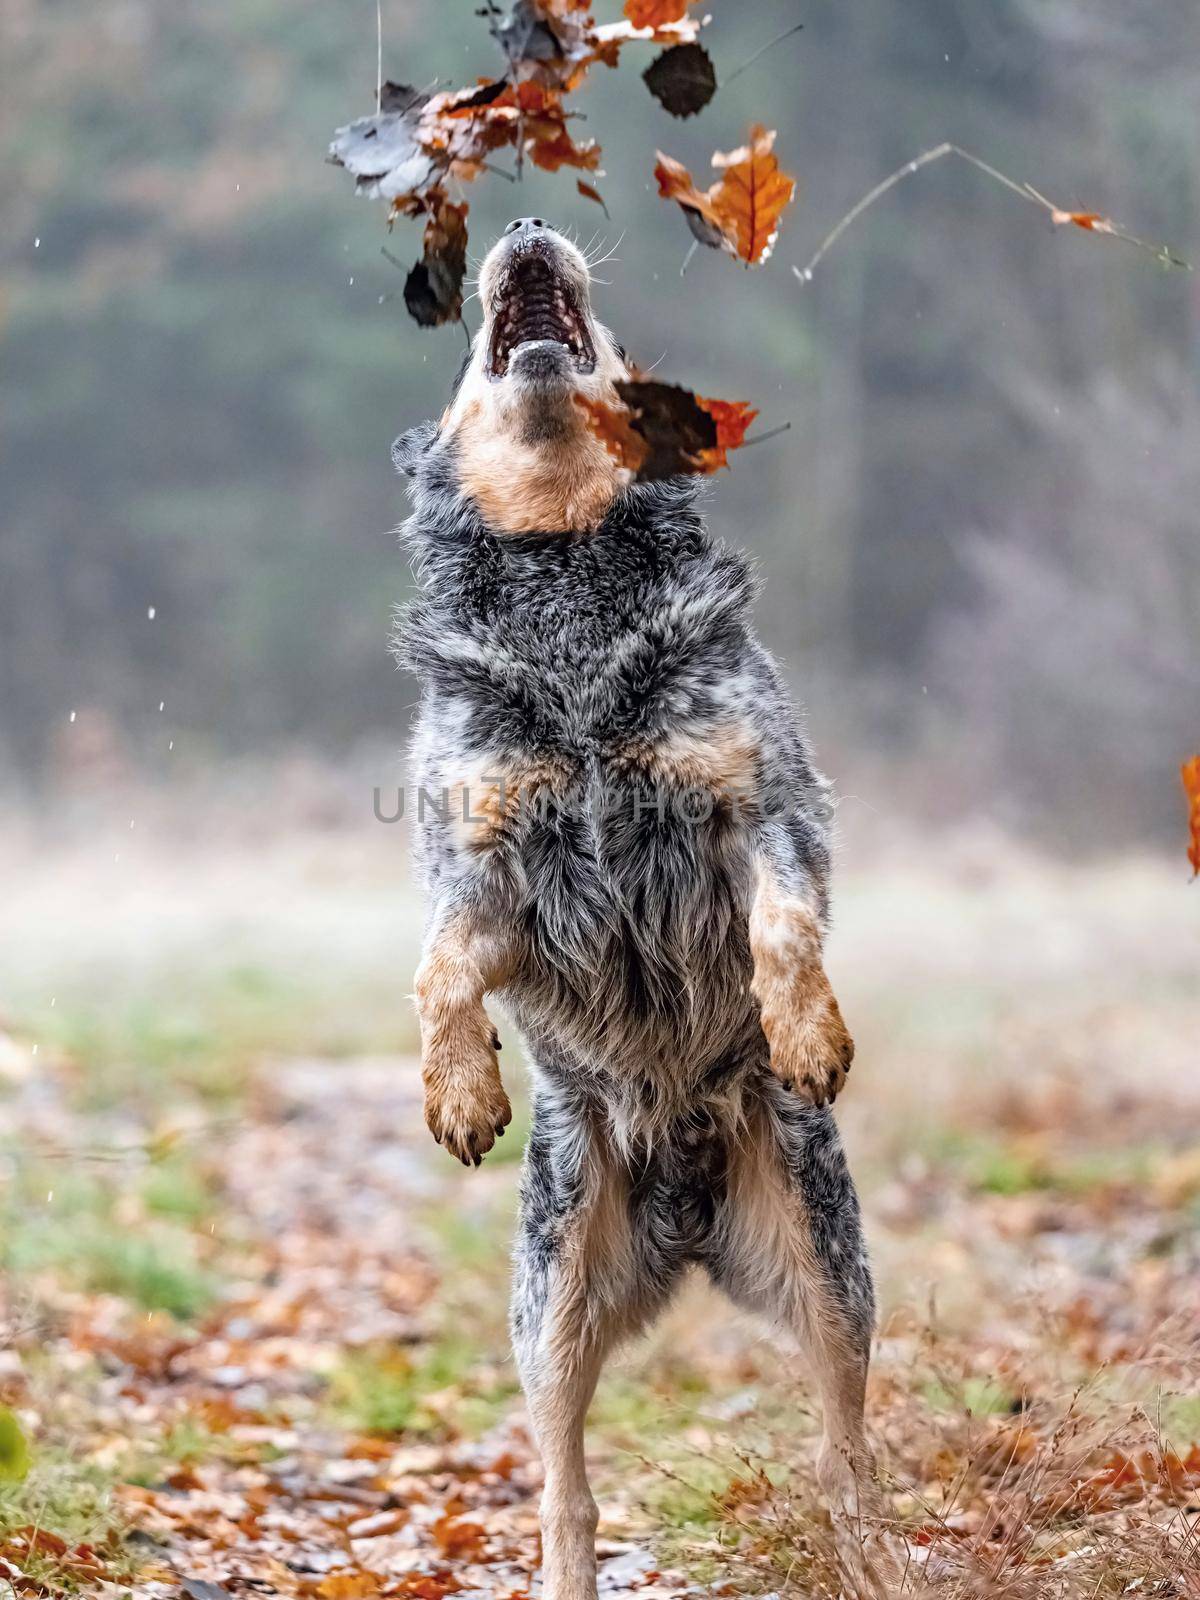 Australian cattle dog in action of catching falling autumn leaves by rdonar2